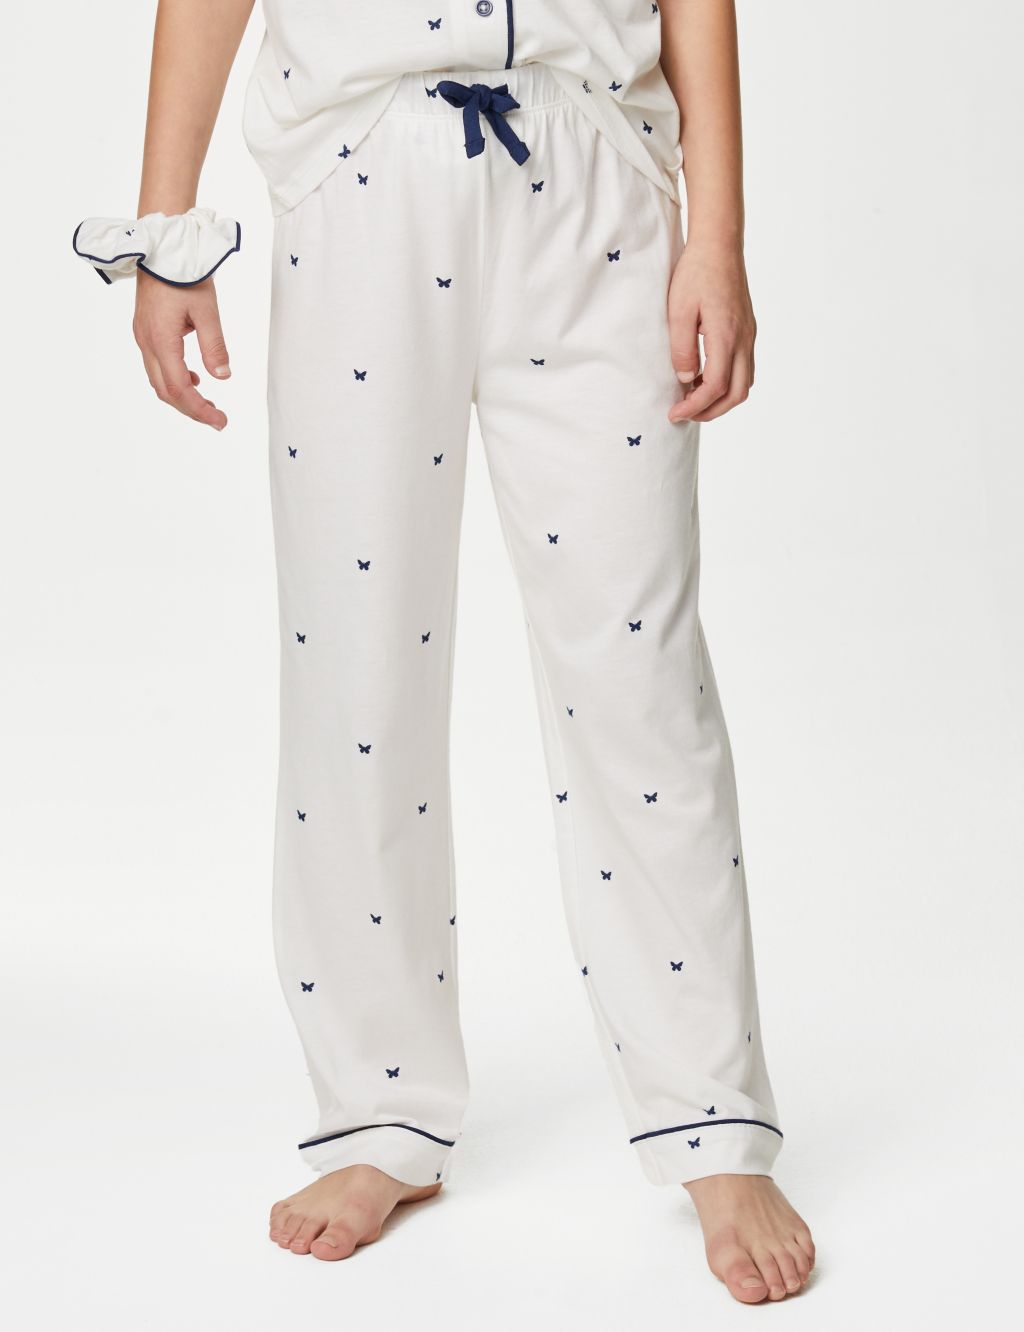 Cotton Blend Butterfly Pyjamas with Scrunchie (6-16 Yrs) image 5